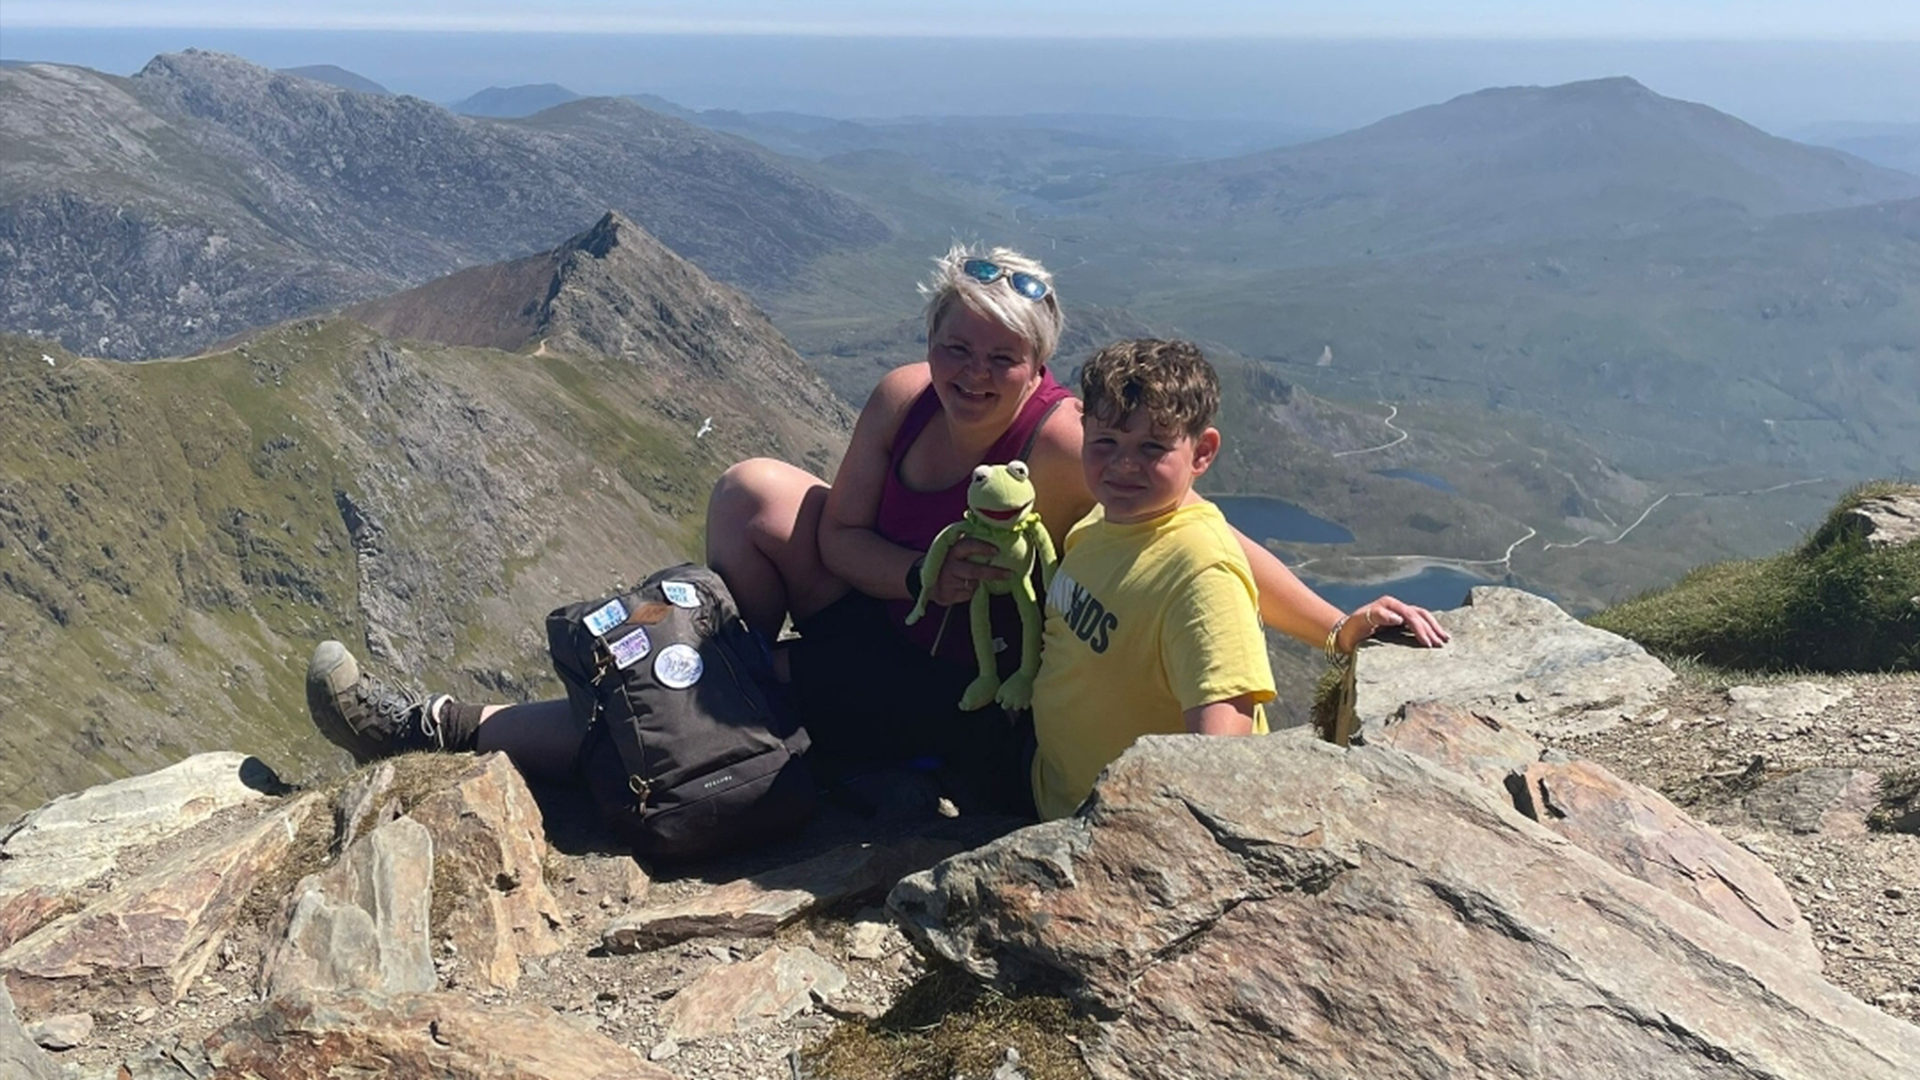 Flynn and his mum on the Snowdon mountain with a Kermit the frog toy.